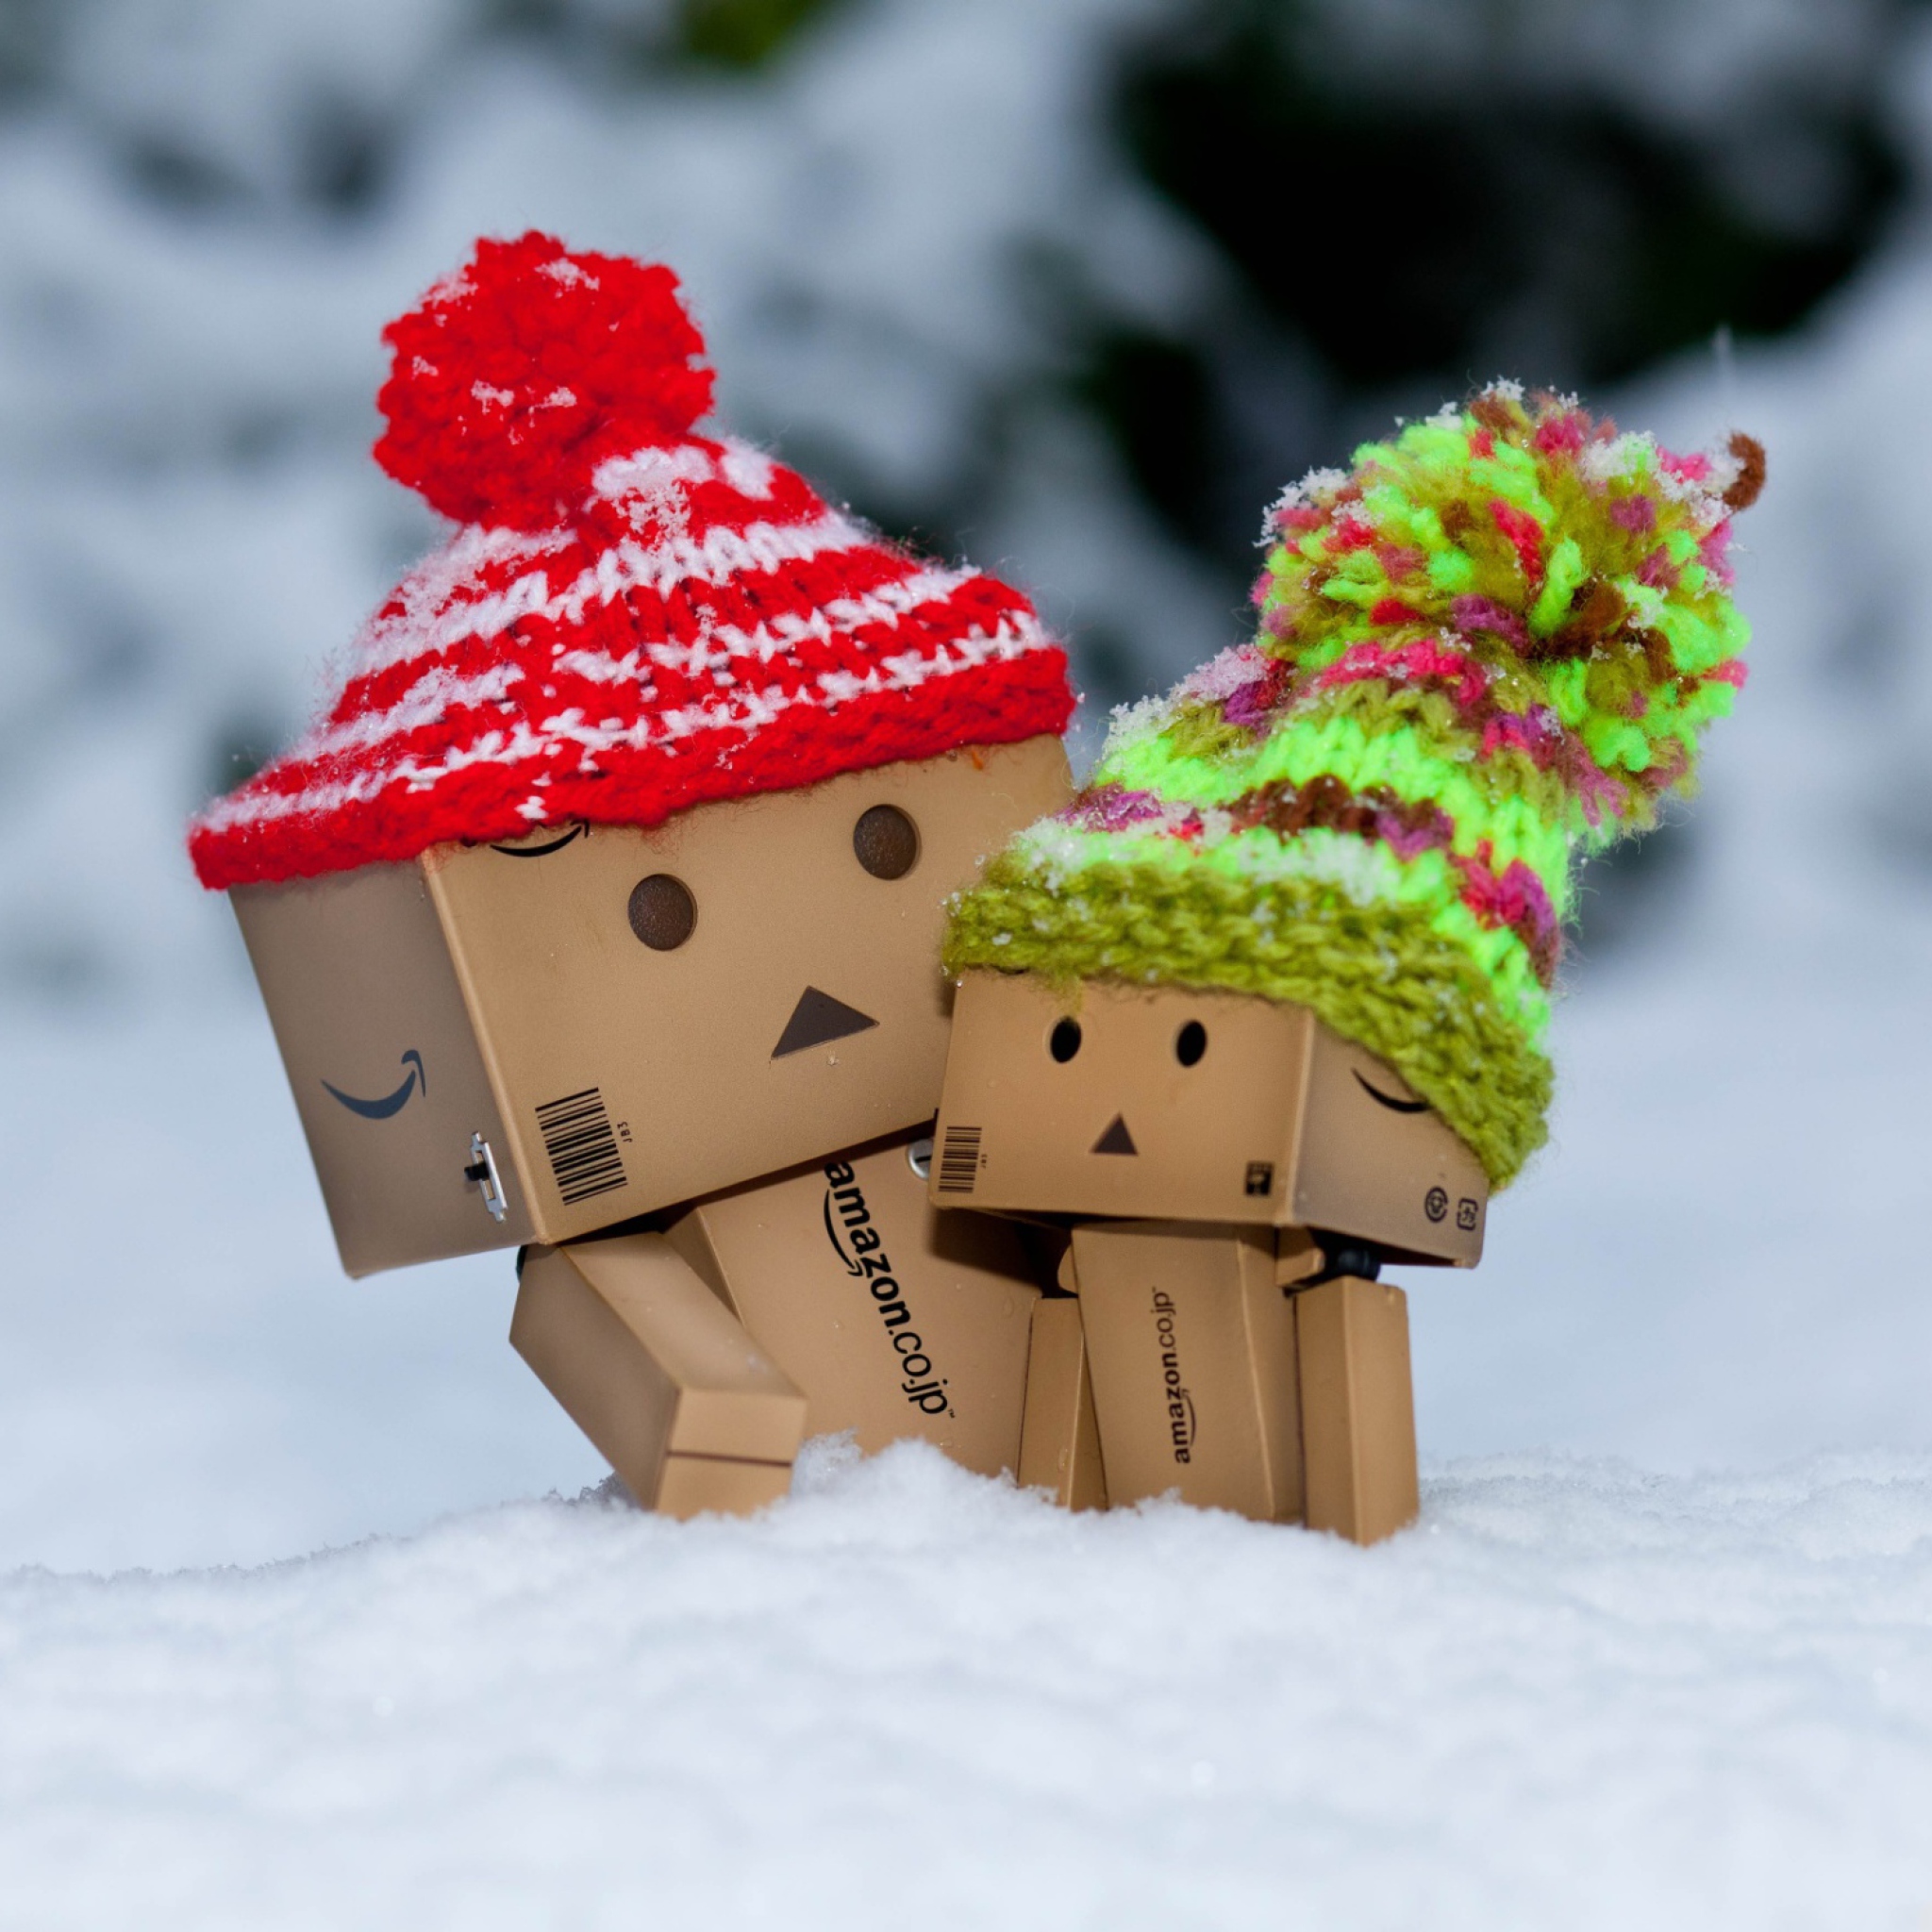 Danbo Is Scared By So Much Snow wallpaper 2048x2048